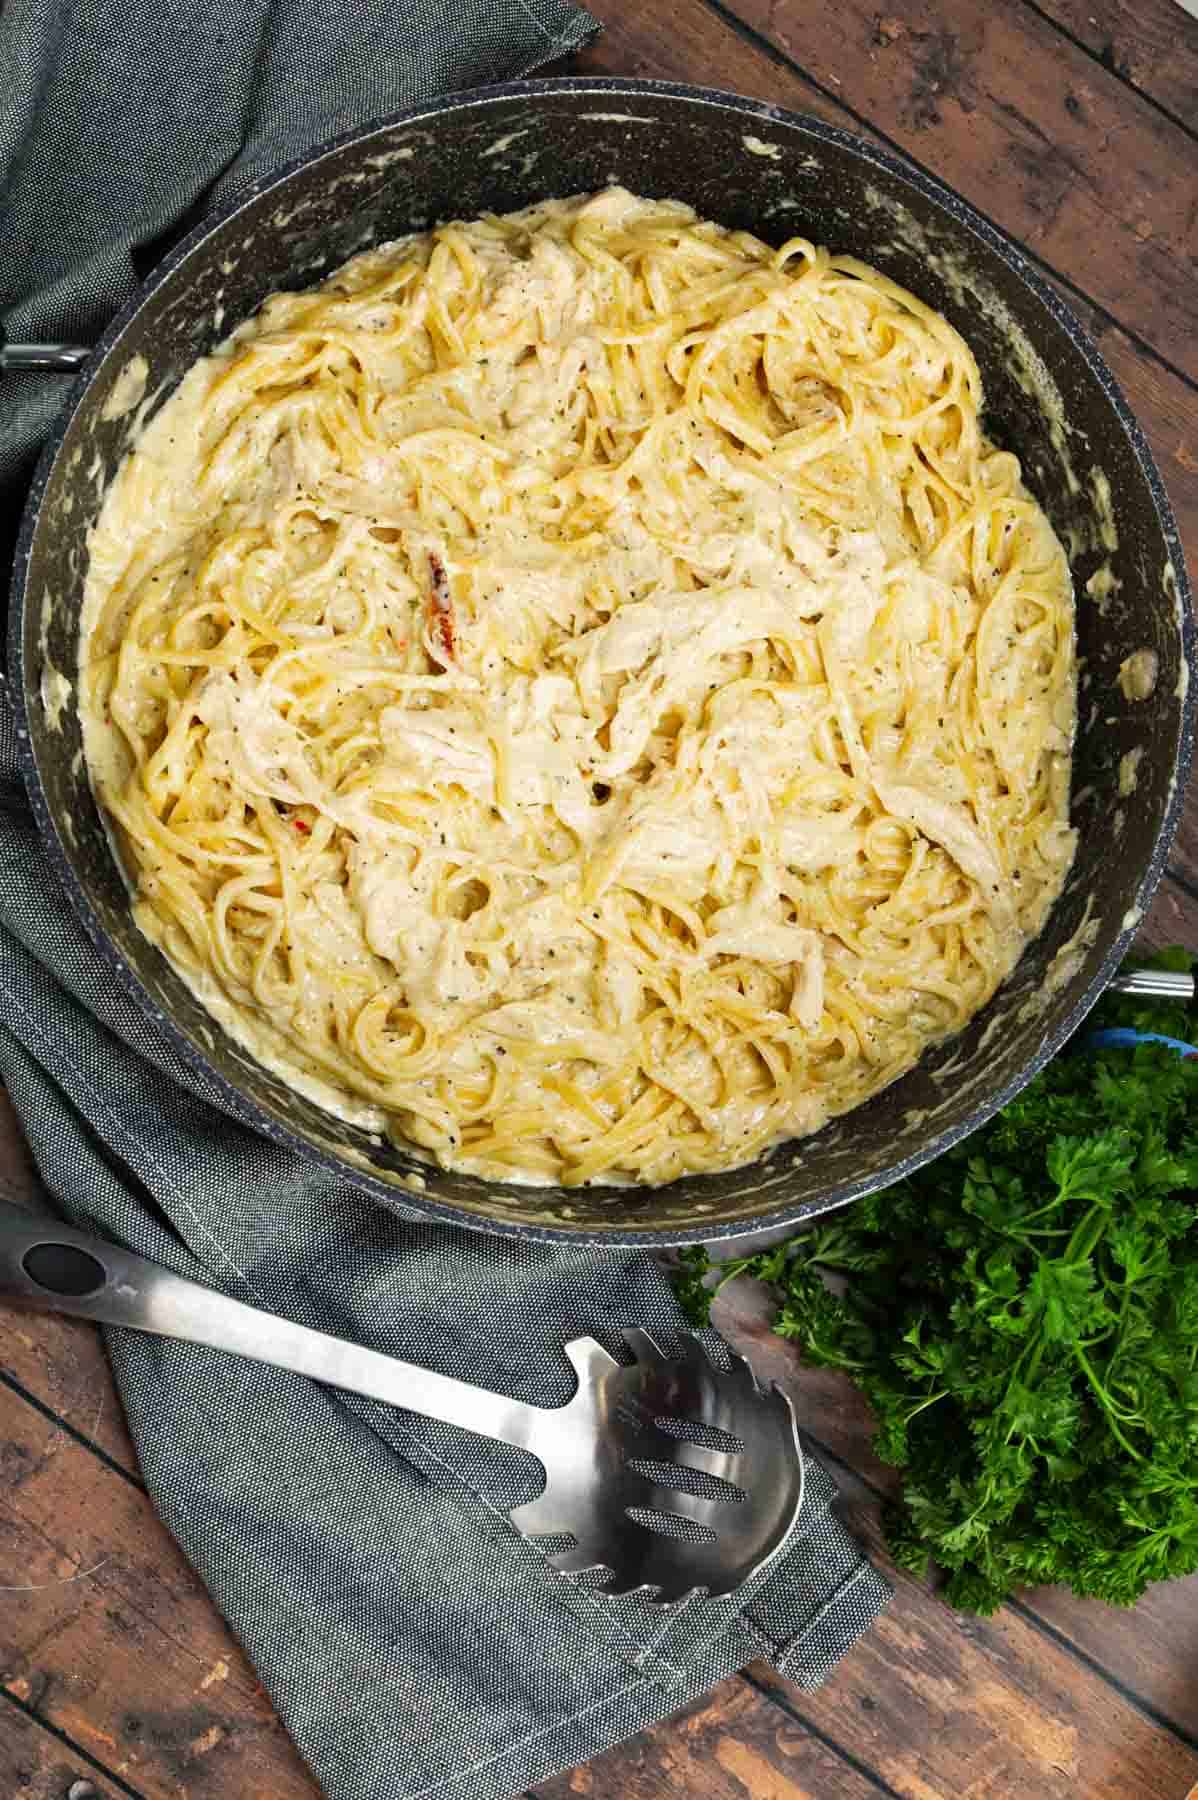 Chicken Alfredo Linguine is a delicious pasta recipe with a creamy garlic parmesan sauce and loaded with shredded rotisserie chicken.